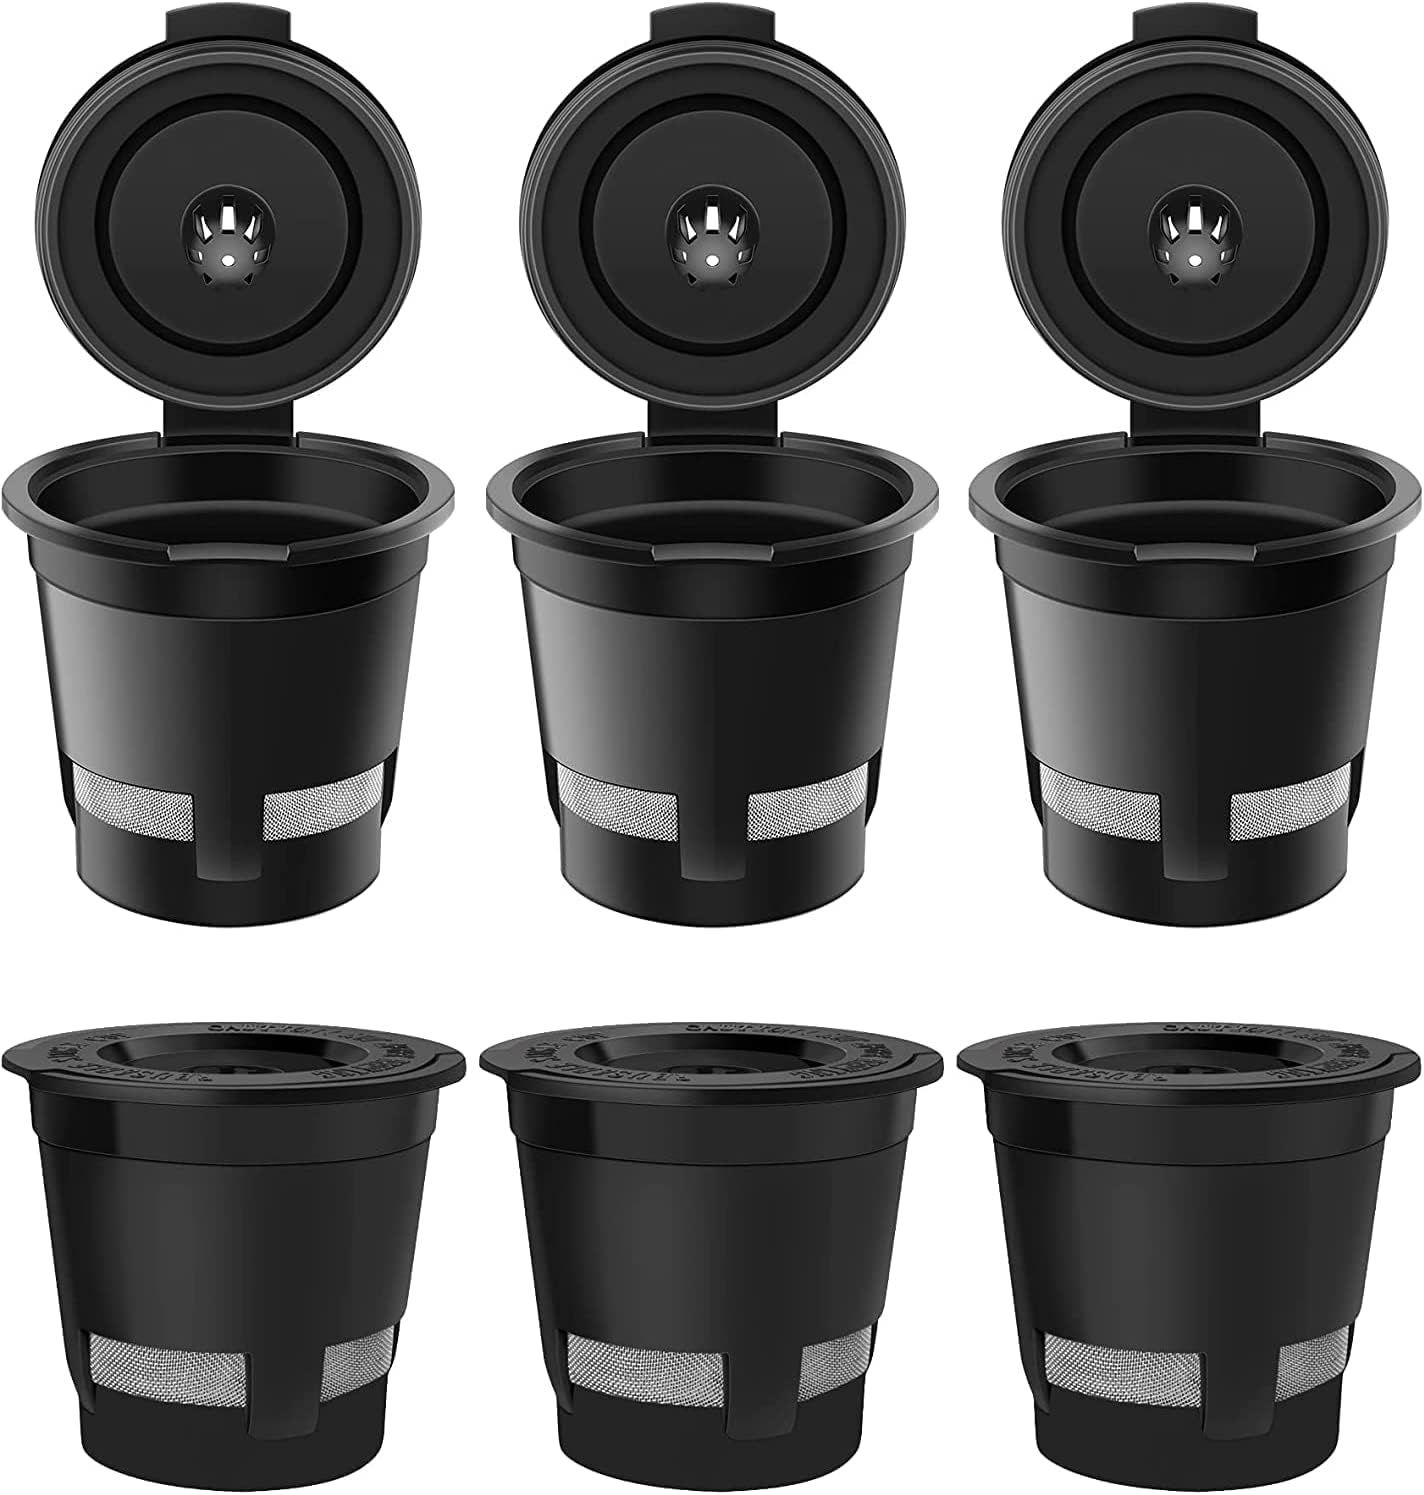 Reusable K Cups for Keurig, EZBASICS Reusable Coffee Filters Refillable Single Serve Coffee Maker, 3-Pack of Reusable Coffee Pods, Black